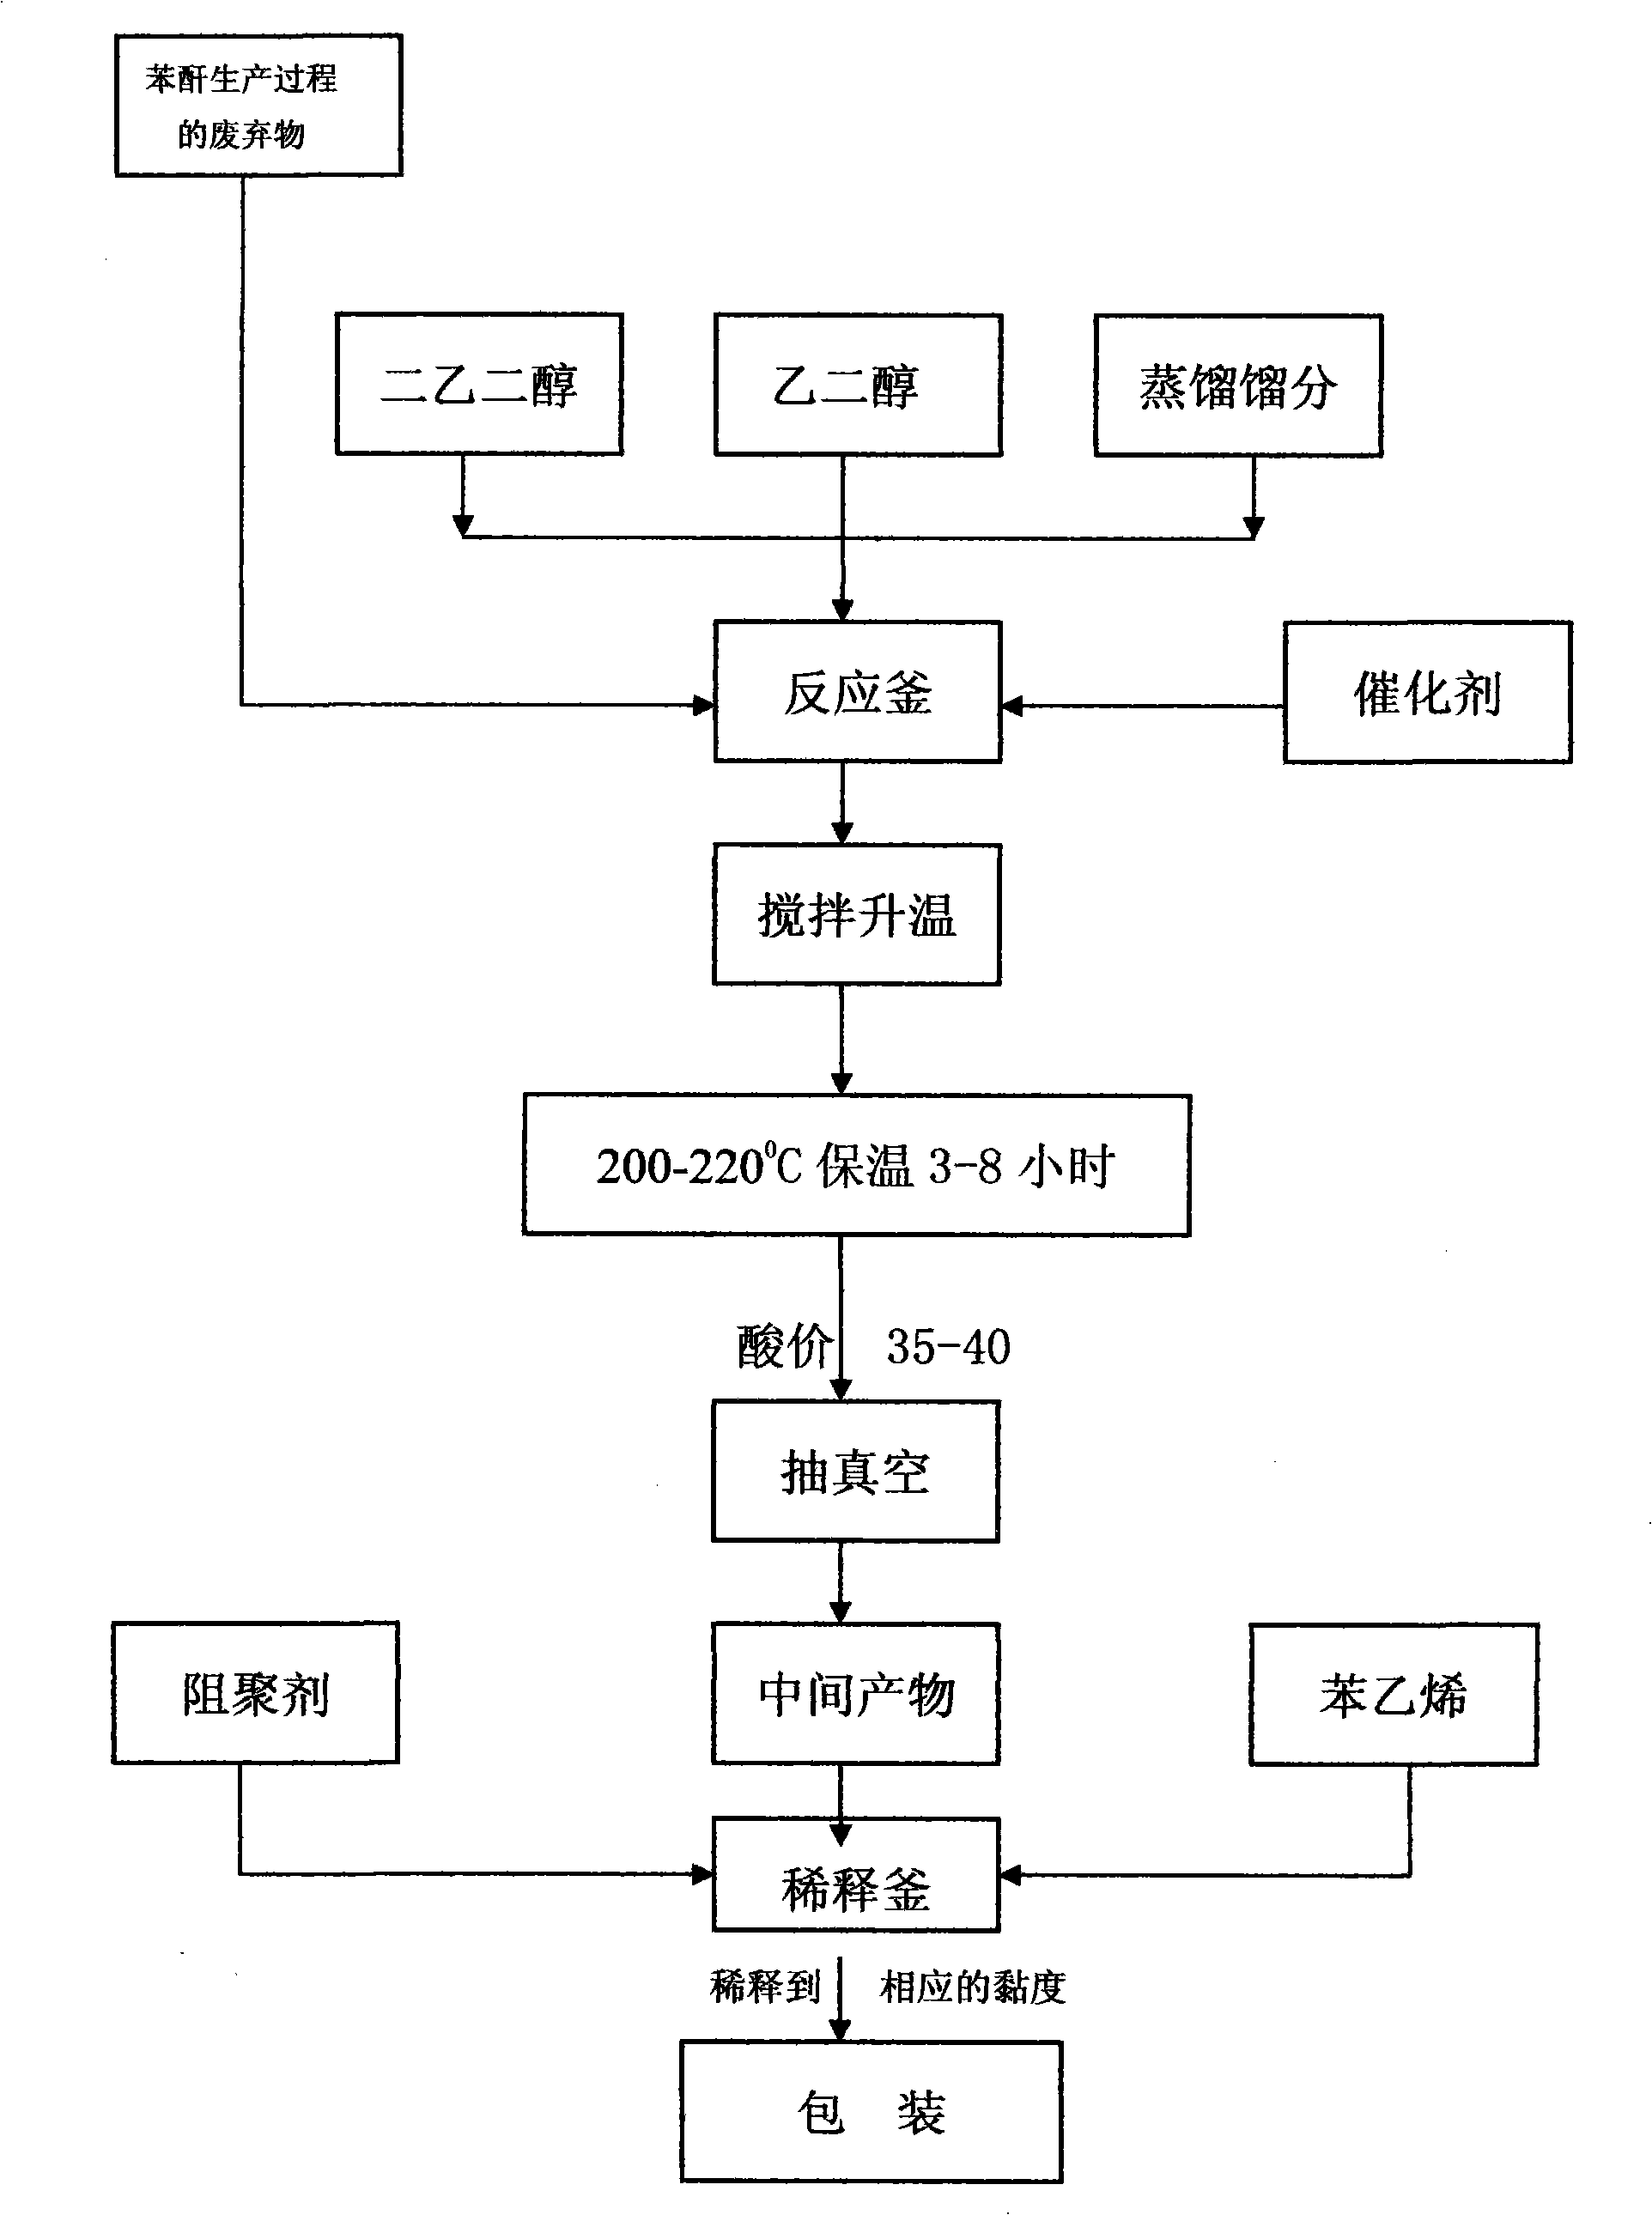 Method for preparing unsaturated polyester resin from wastes of benzoic anhydride production process and distillation fraction